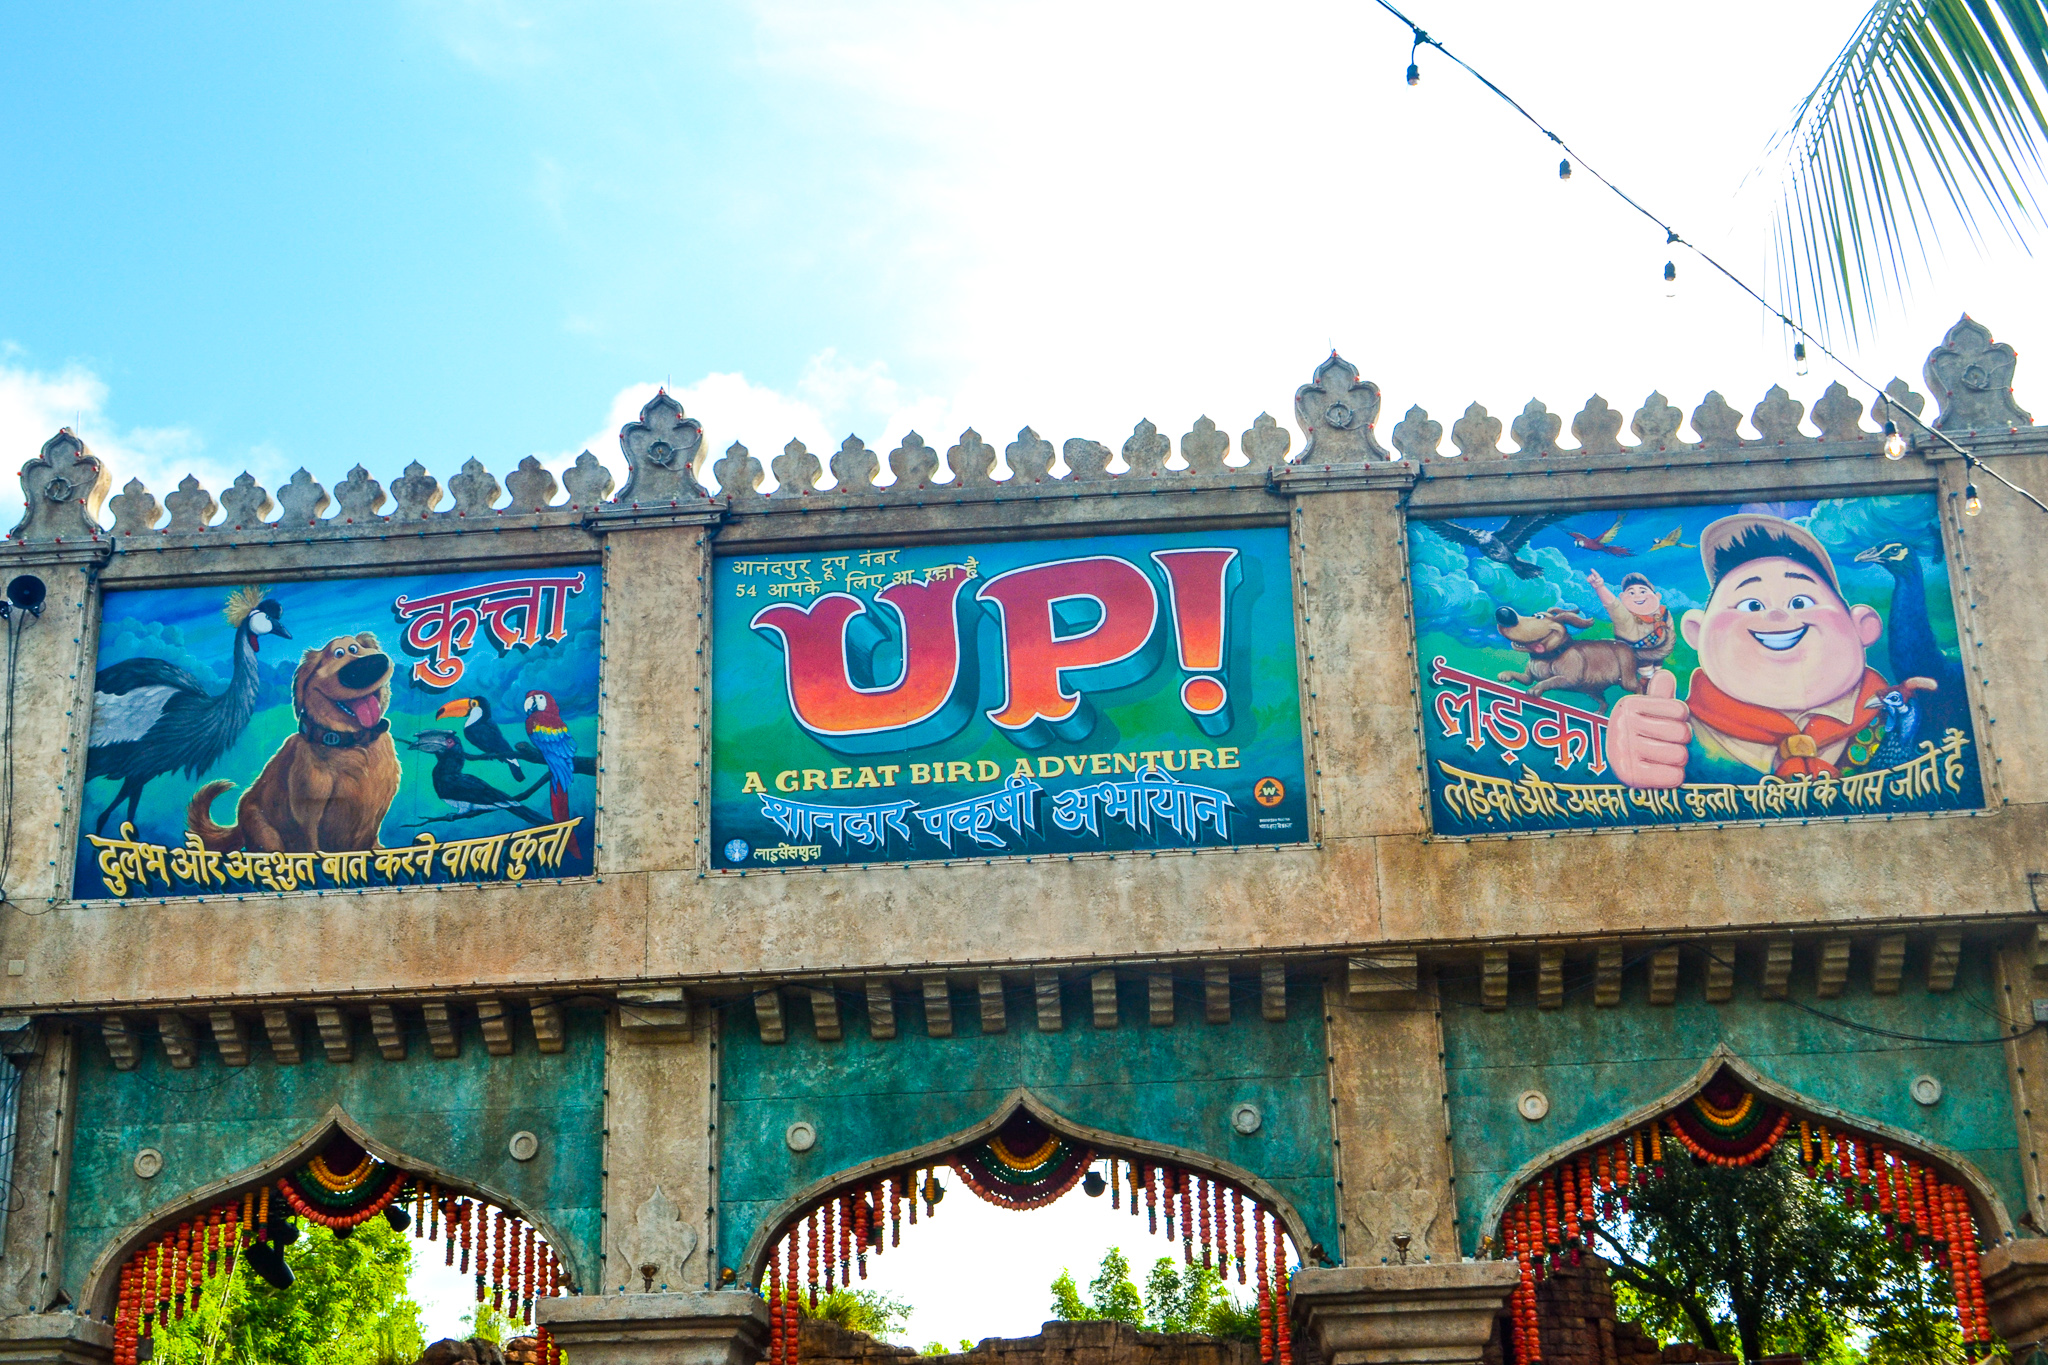 Up! A Great Bird Adventure signage outside of auditorium in Animal Kingdom